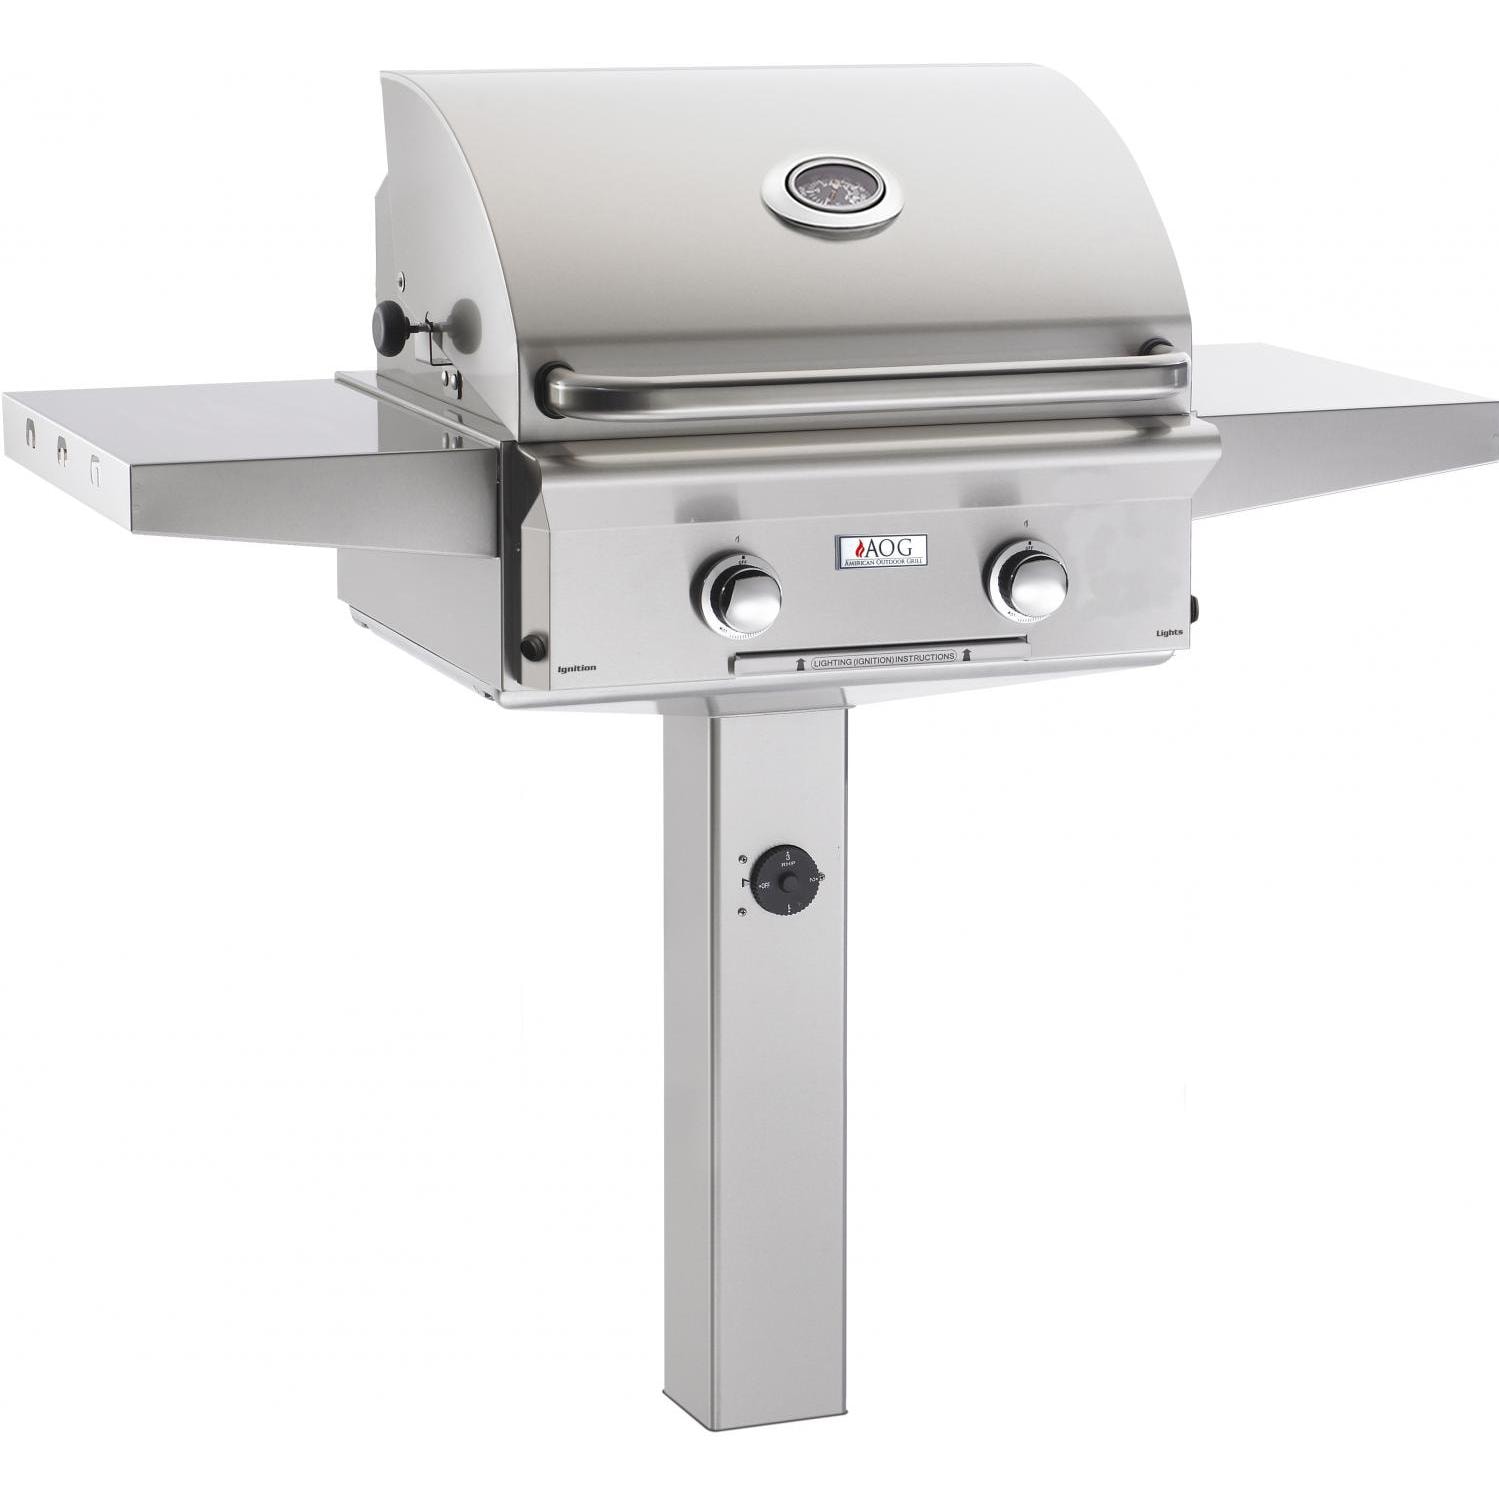 American Outdoor Grill 24NGL-00SP L-Series 24 Inch Natural Gas Grill On In-Ground Post - image 1 of 6